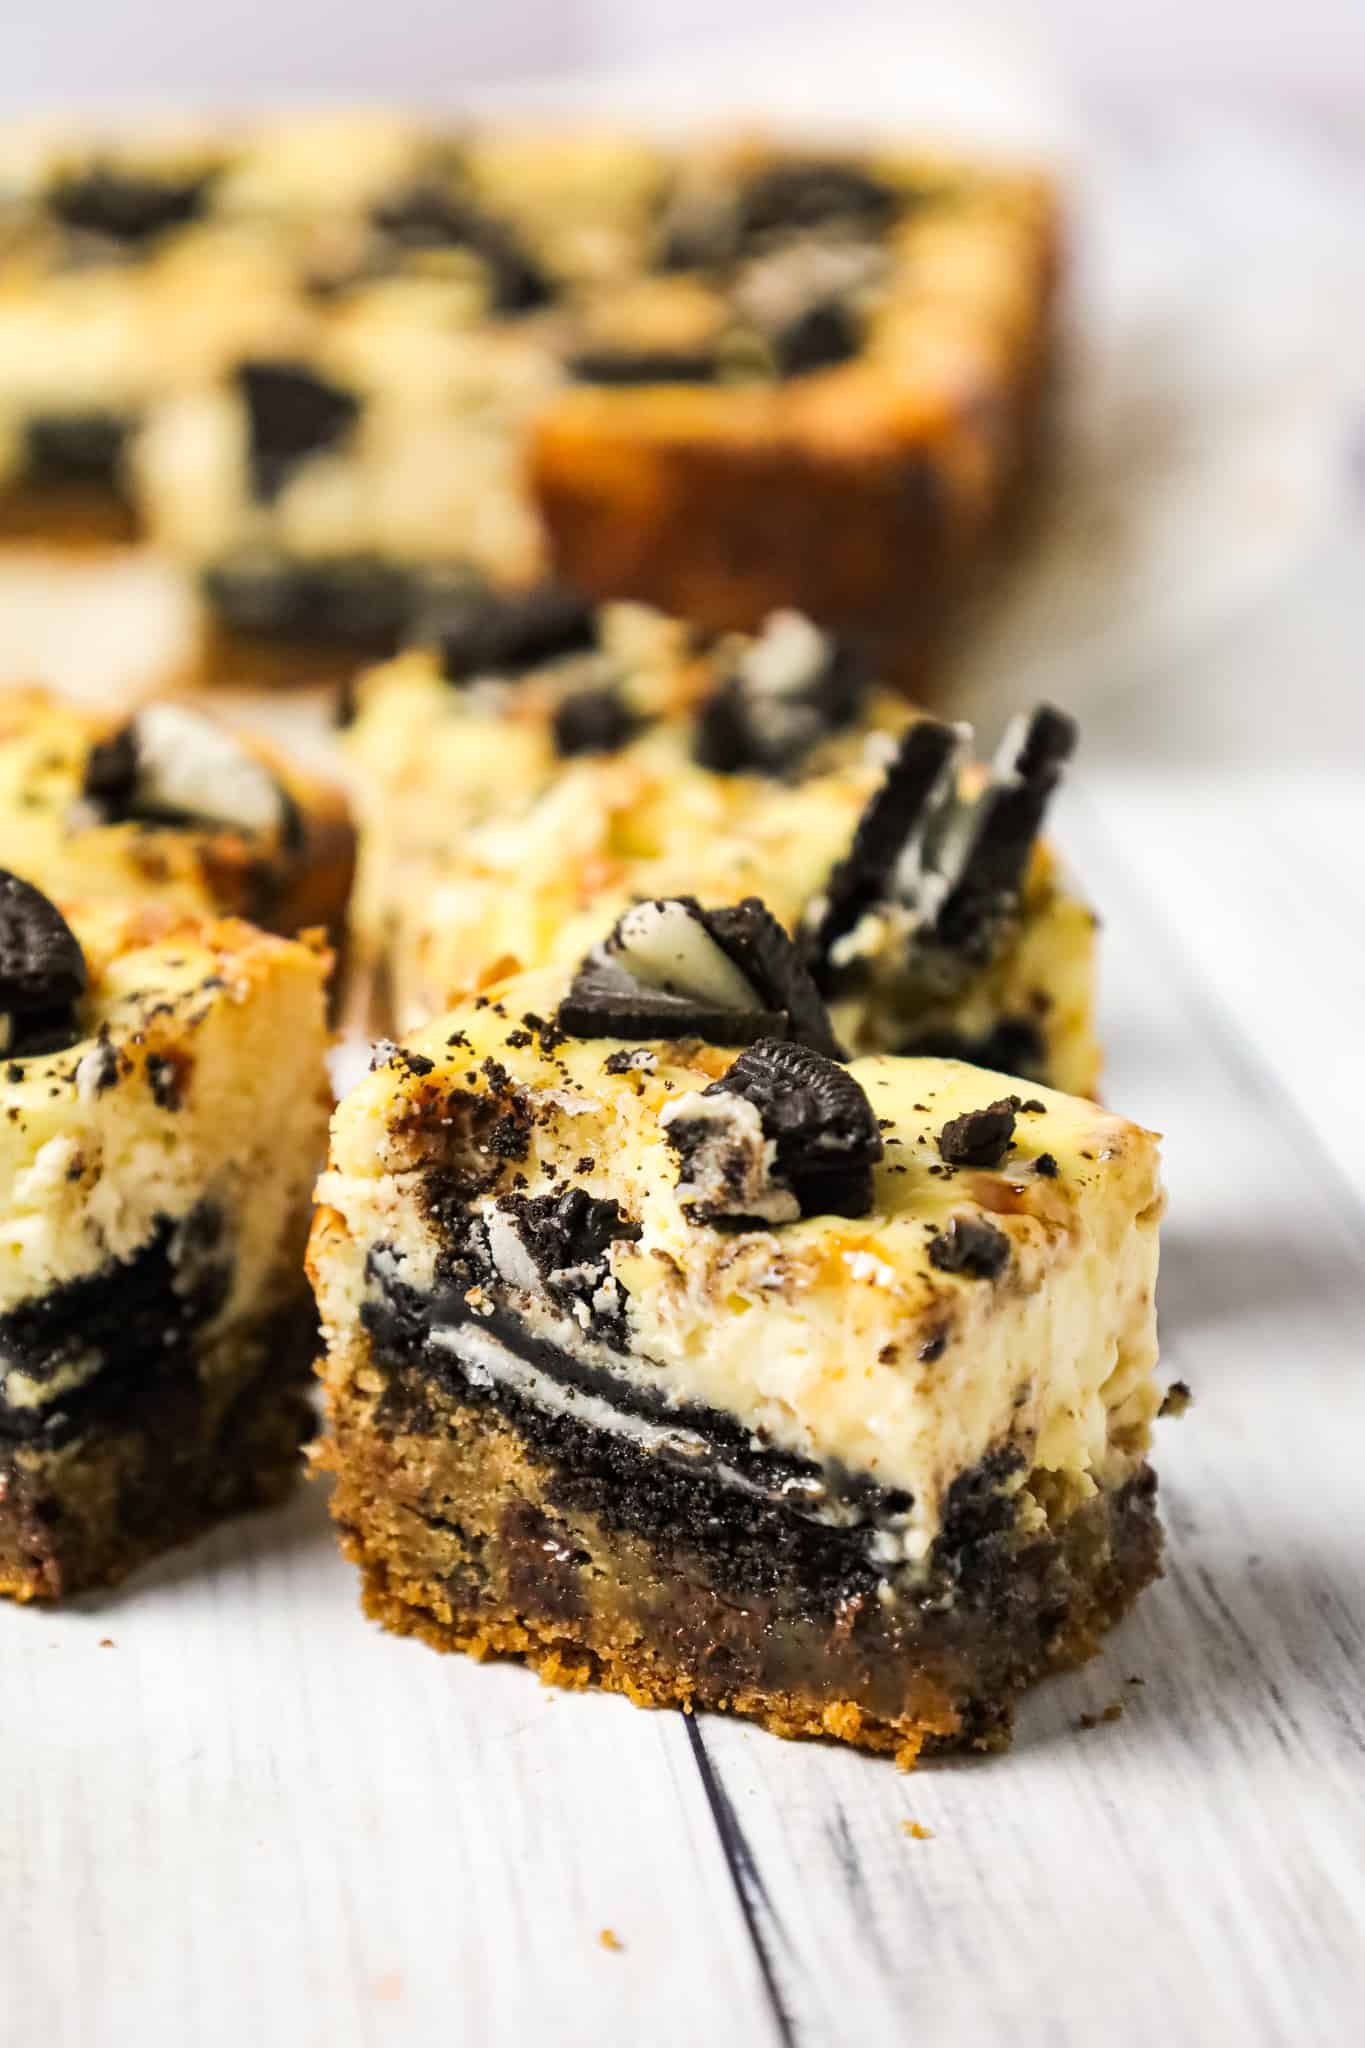 Slutty Cheesecake Bars are a decadent dessert recipe with a base of chocolate chip cookie dough topped with Oreo cookies, cheesecake and Skor toffee bits.